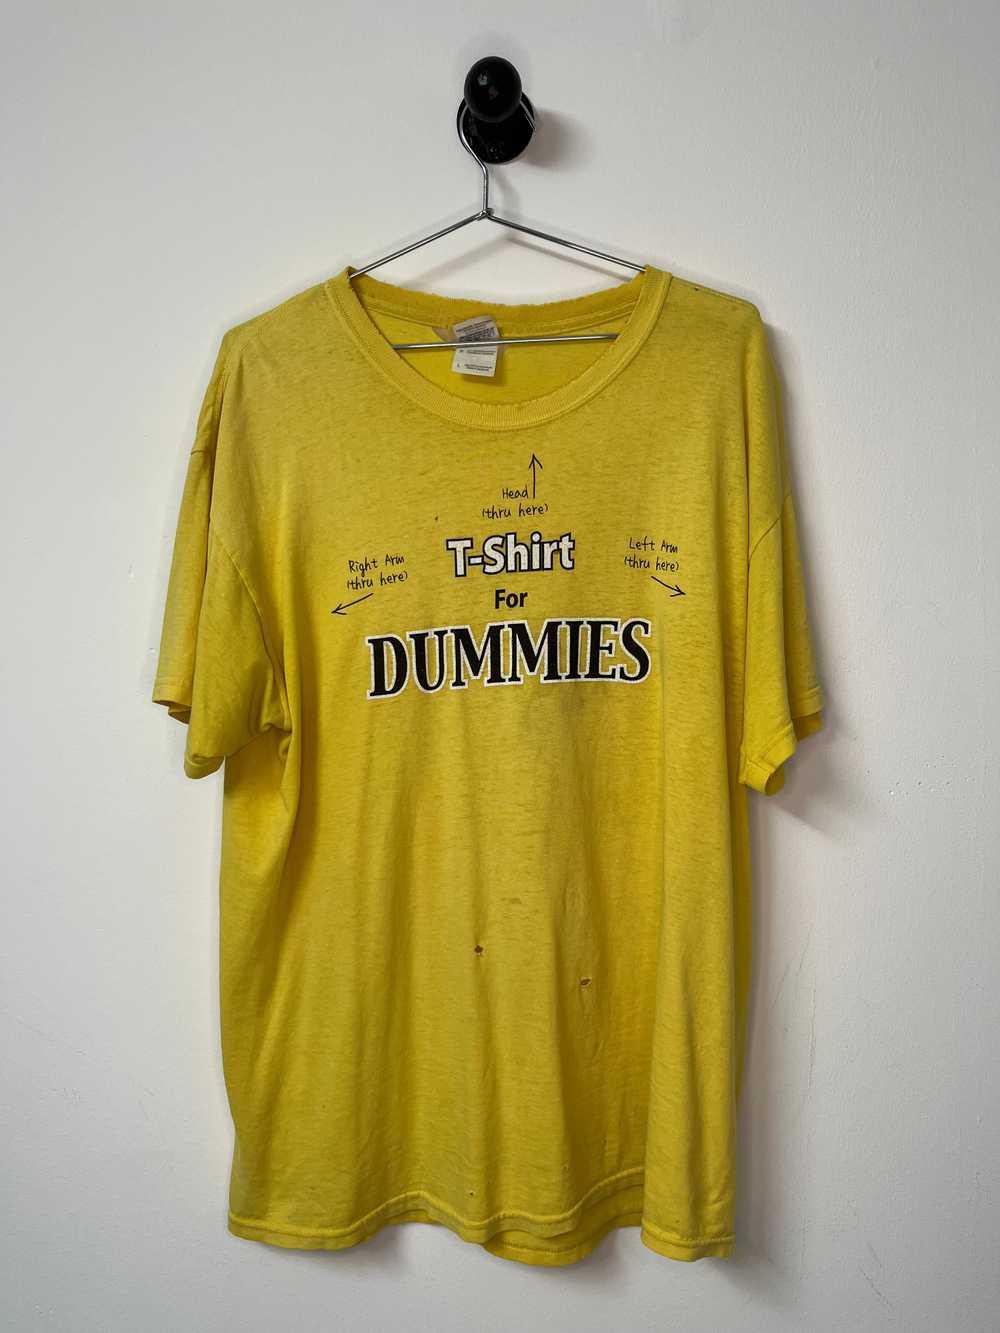 90s T-Shirt For Dummies Humor T-Shirt - Aged Cana… - image 1